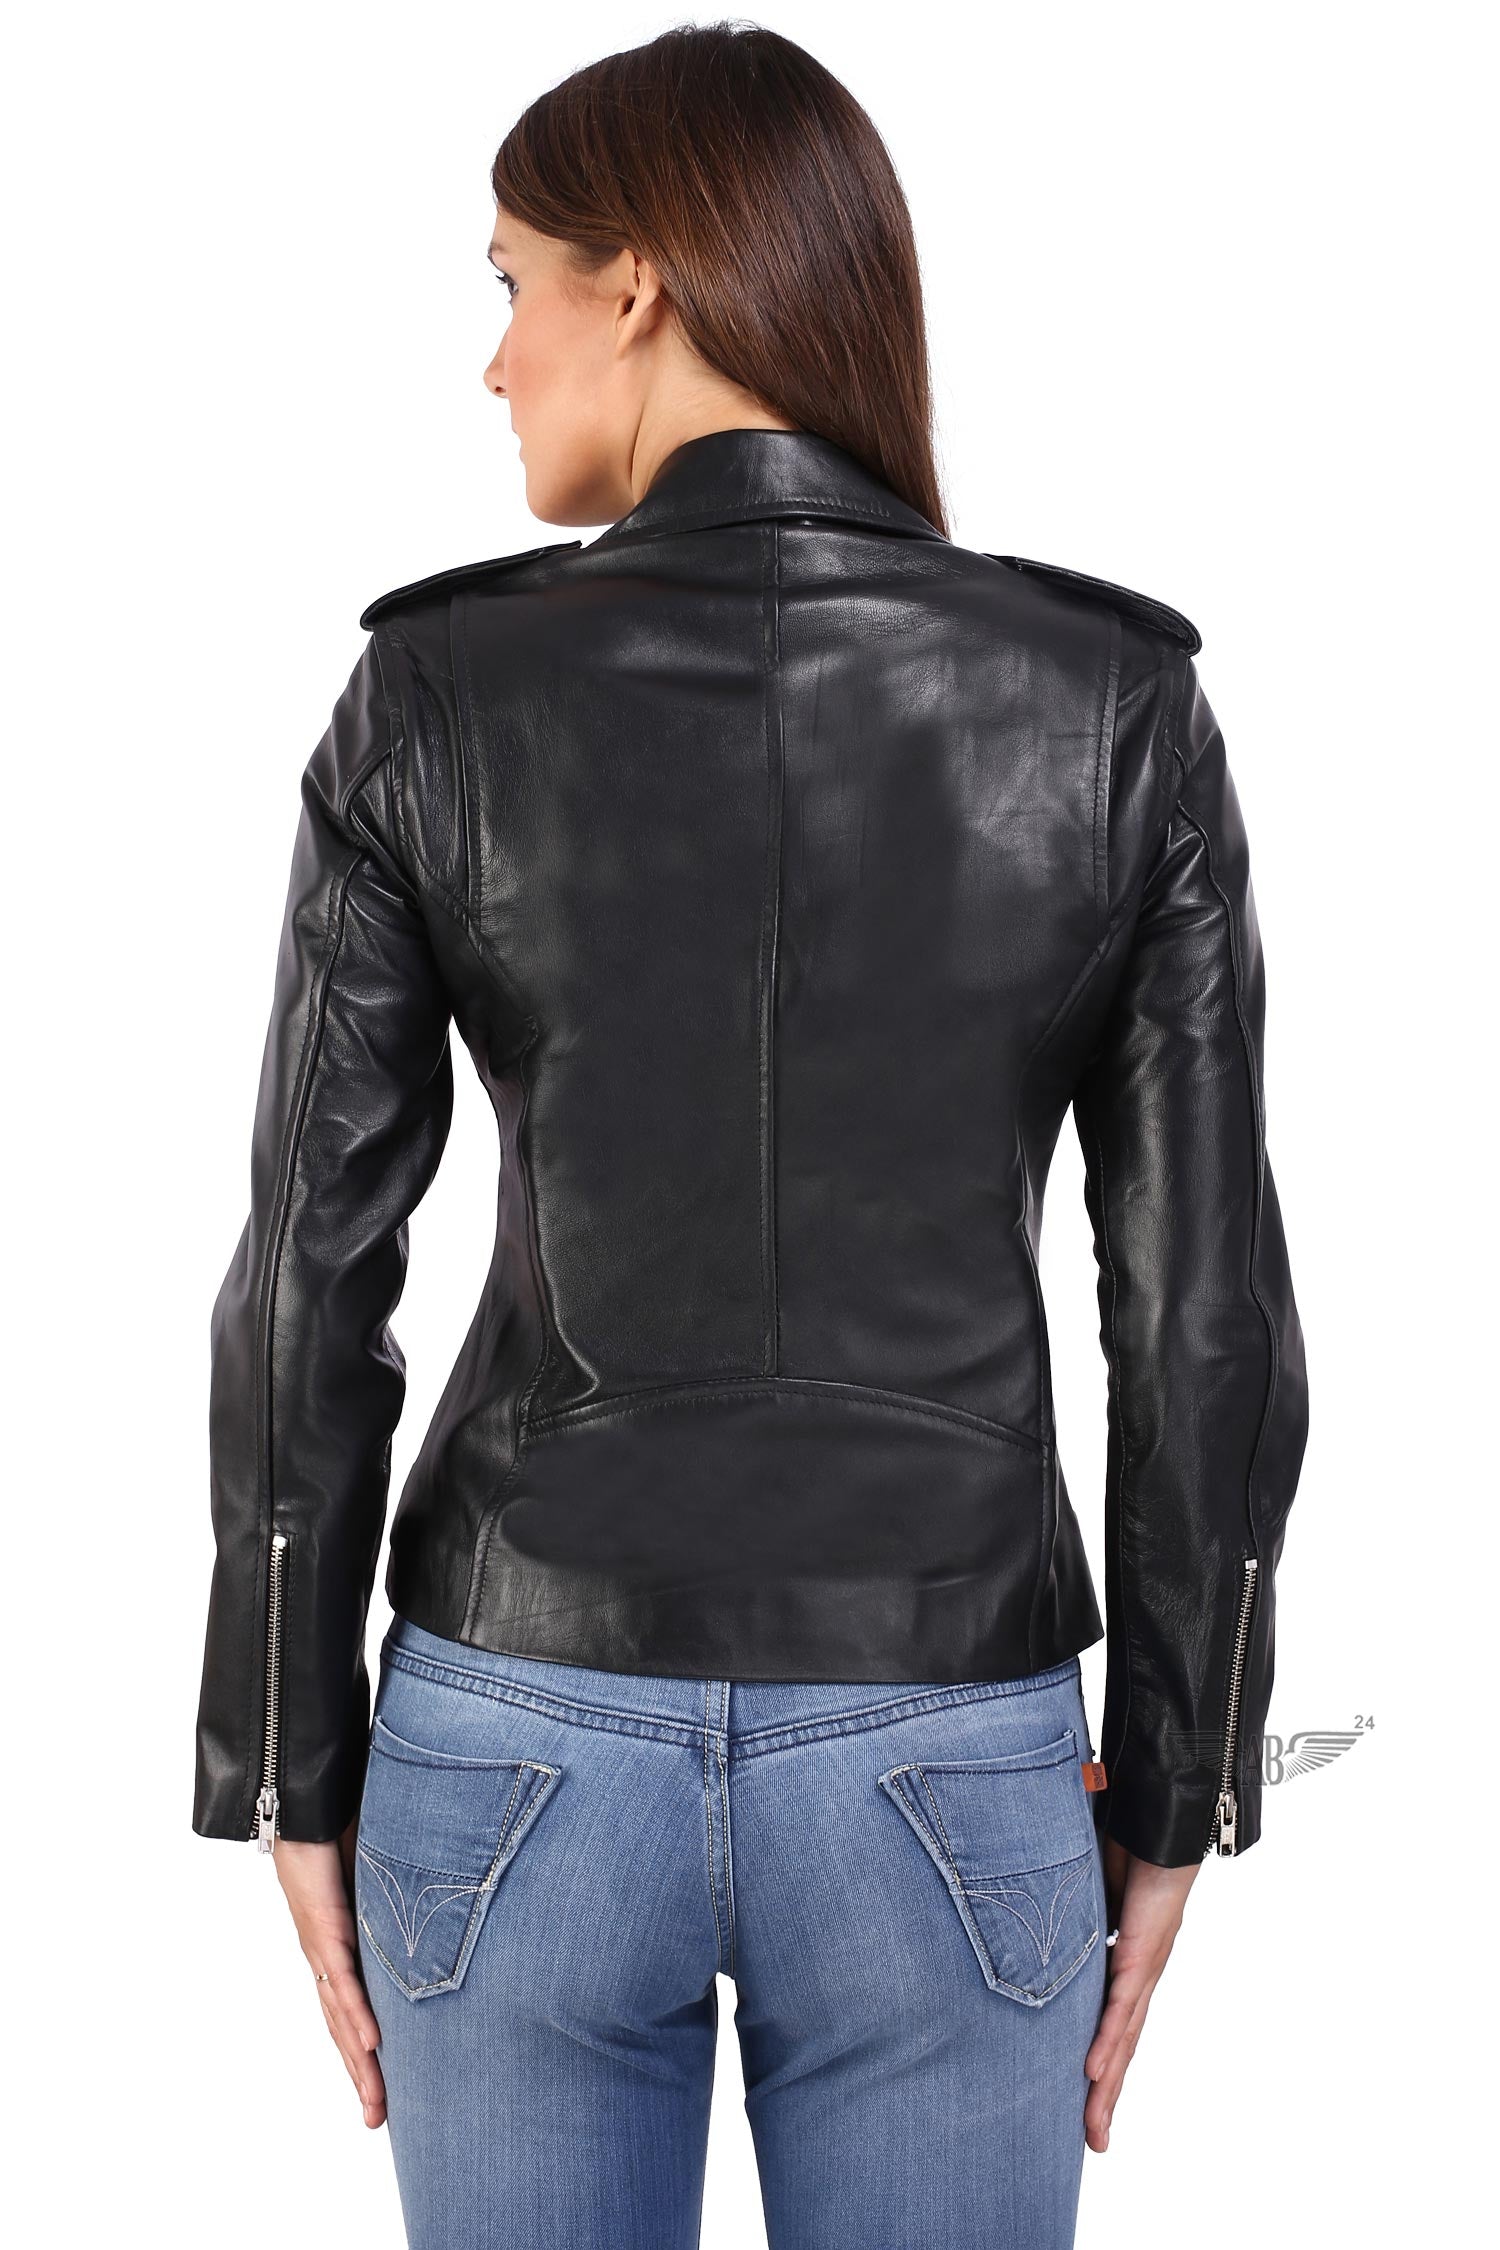 Back side image of GREASE PERFECTO BIKER JACKET WOMENS